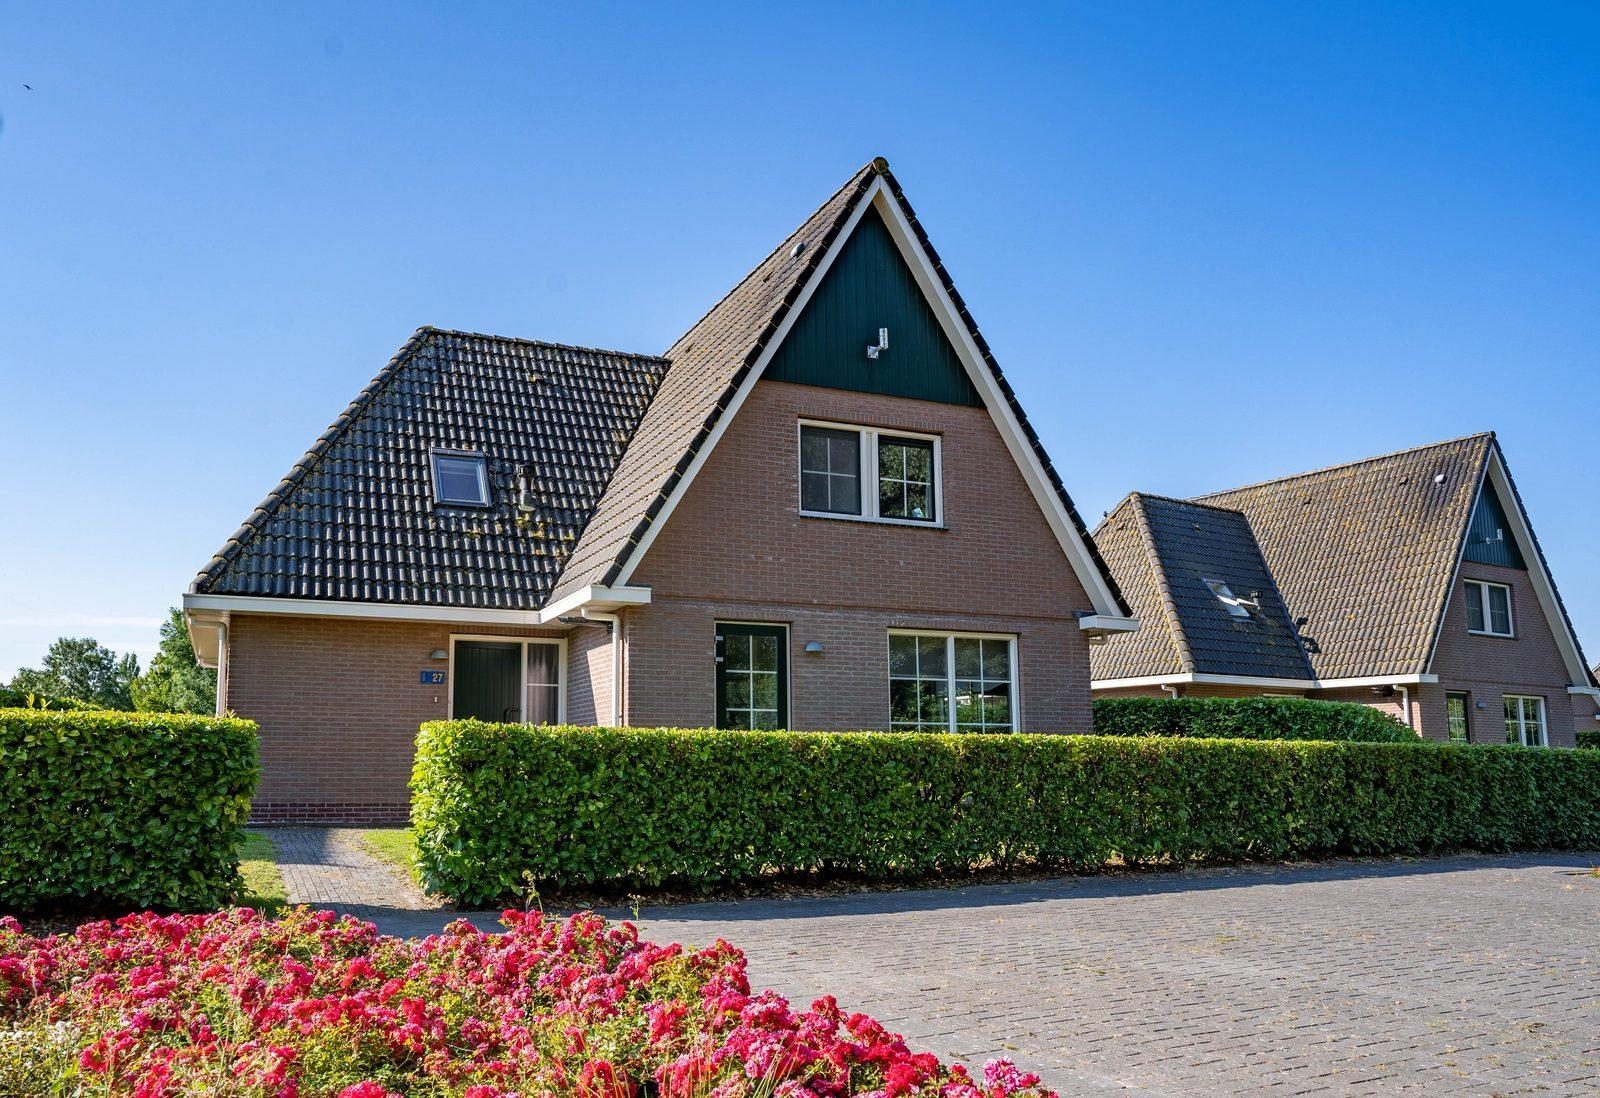 Buy recreation home the Netherlands